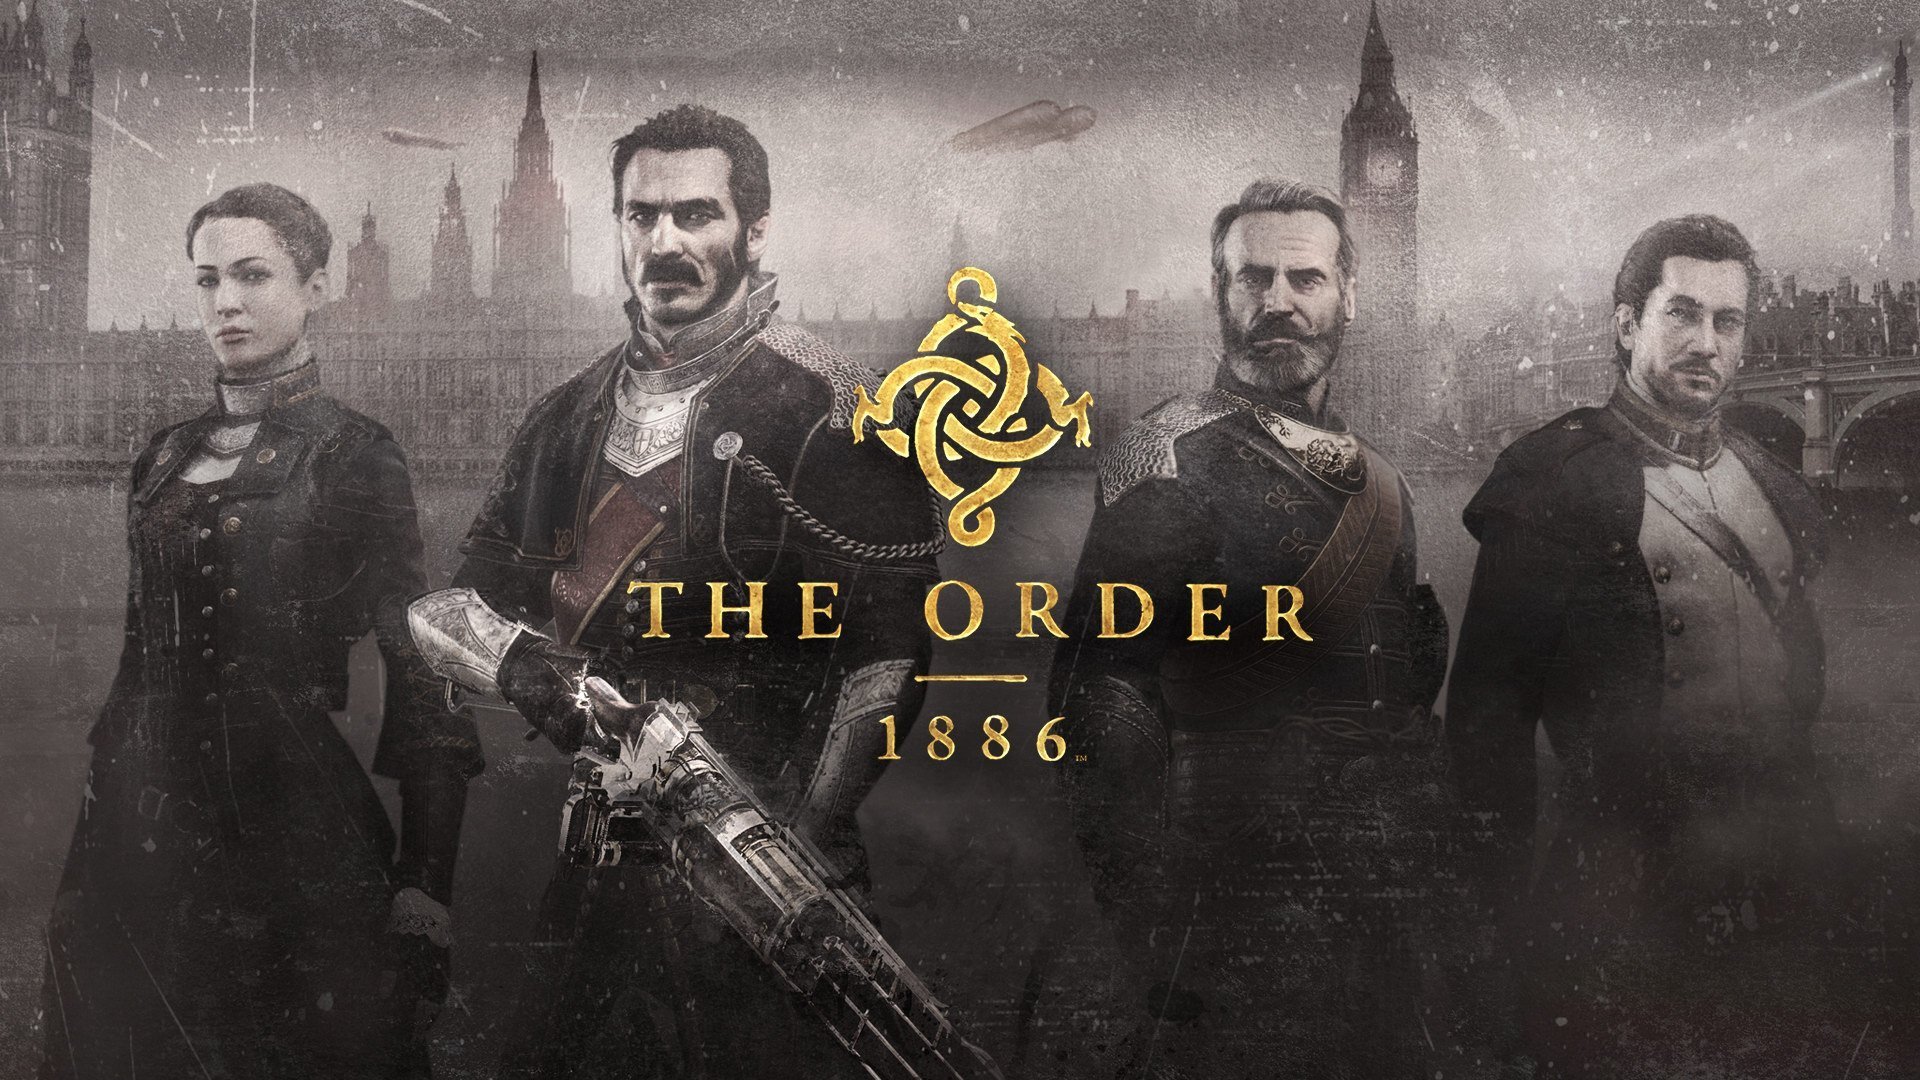 The Order 188600